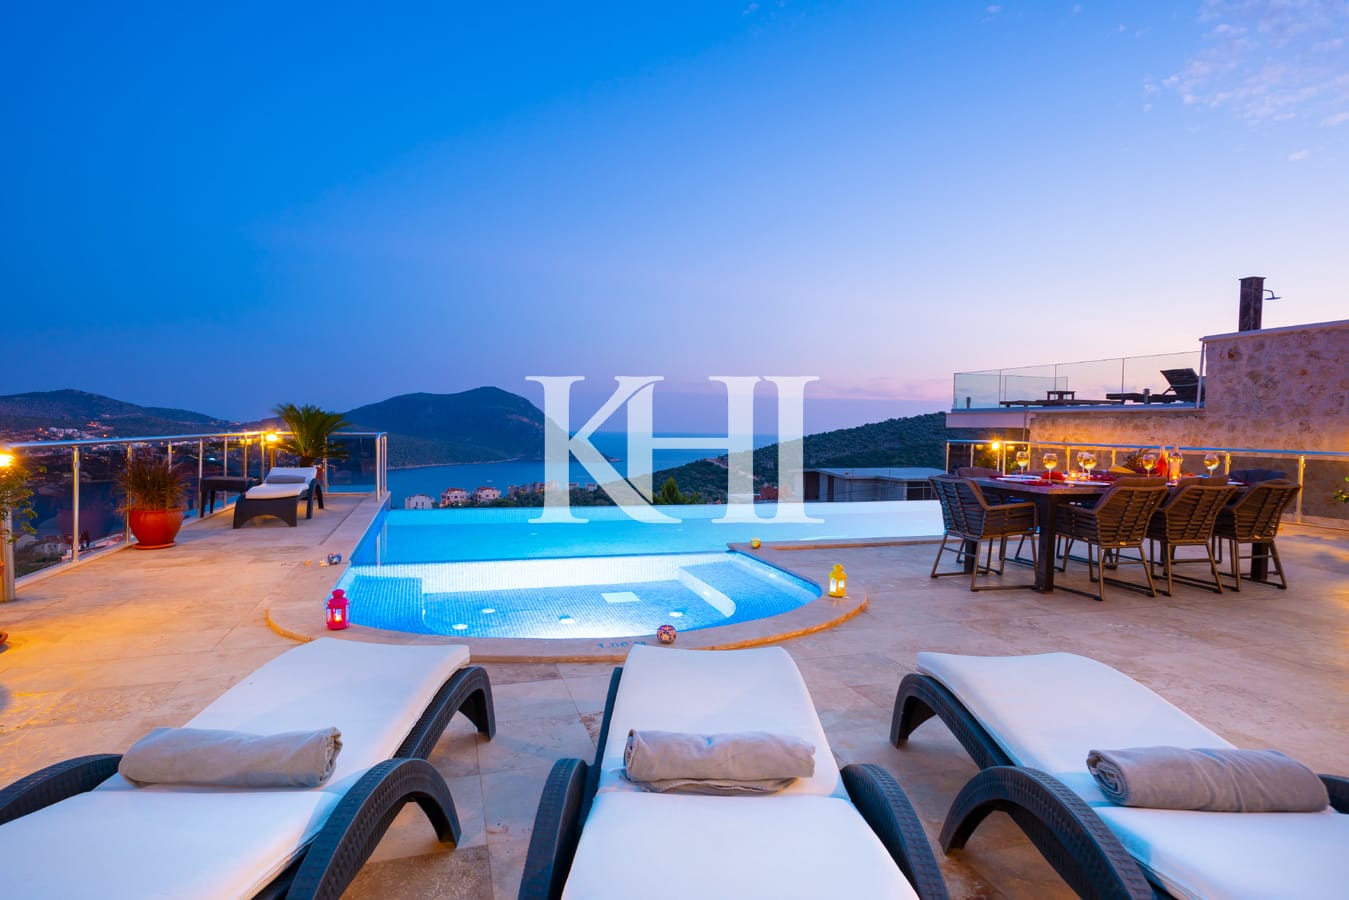 Detached Villa For Sale With Panoramic Kalkan View Slide Image 13